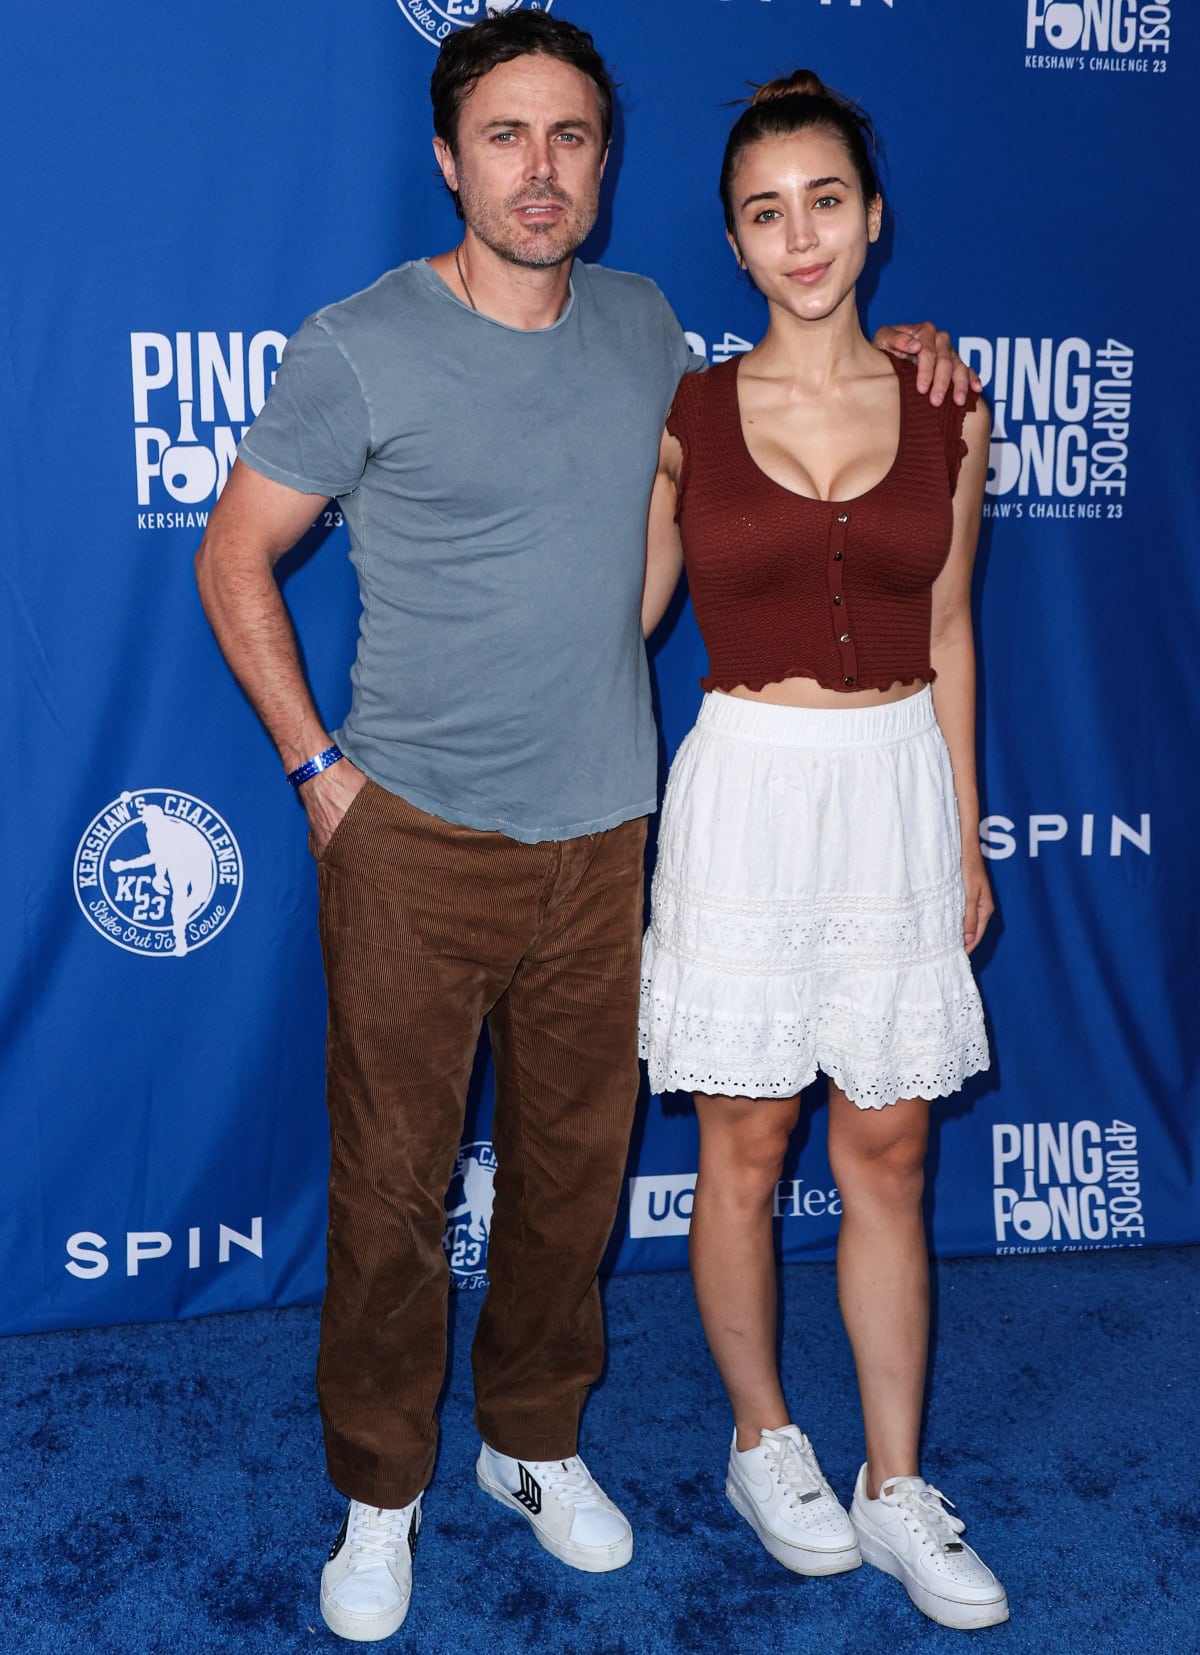 Casey Affleck and Caylee Cowan share an age gap of 23 years, with a slight height difference of four inches between them